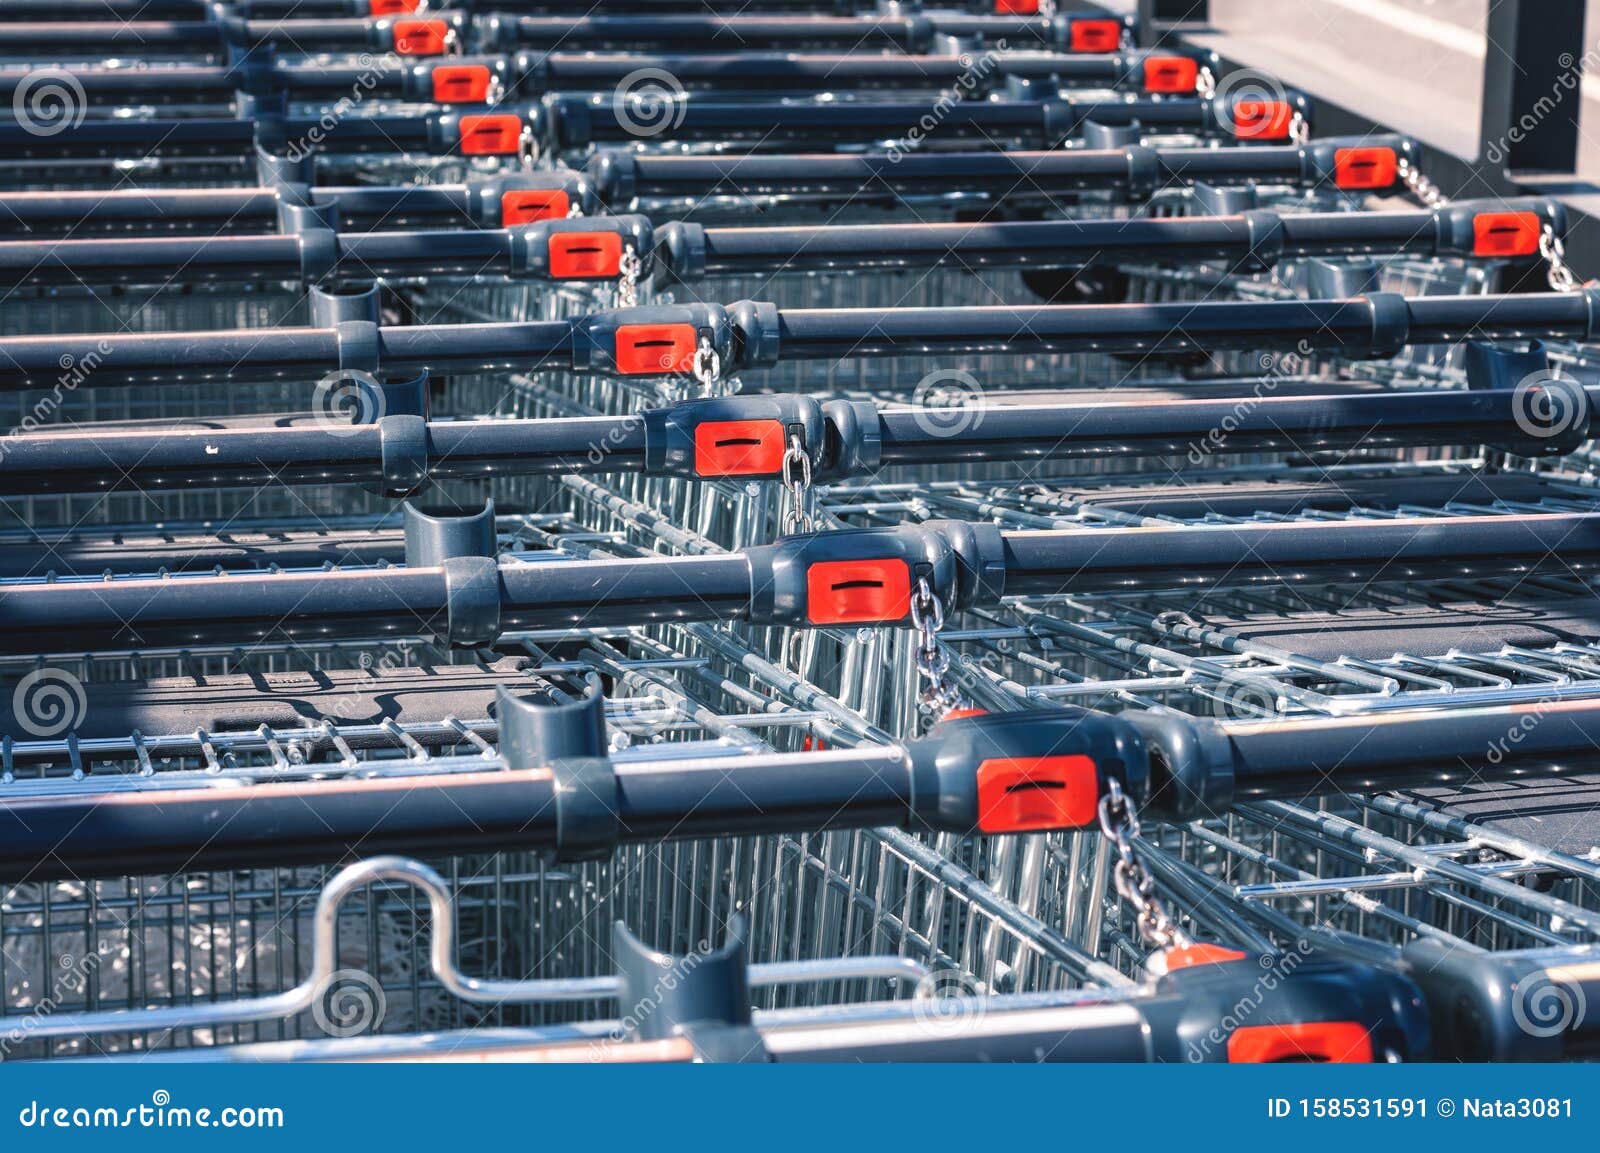 shopping carts in the store, assembled in a row in the parking lot. close-up.